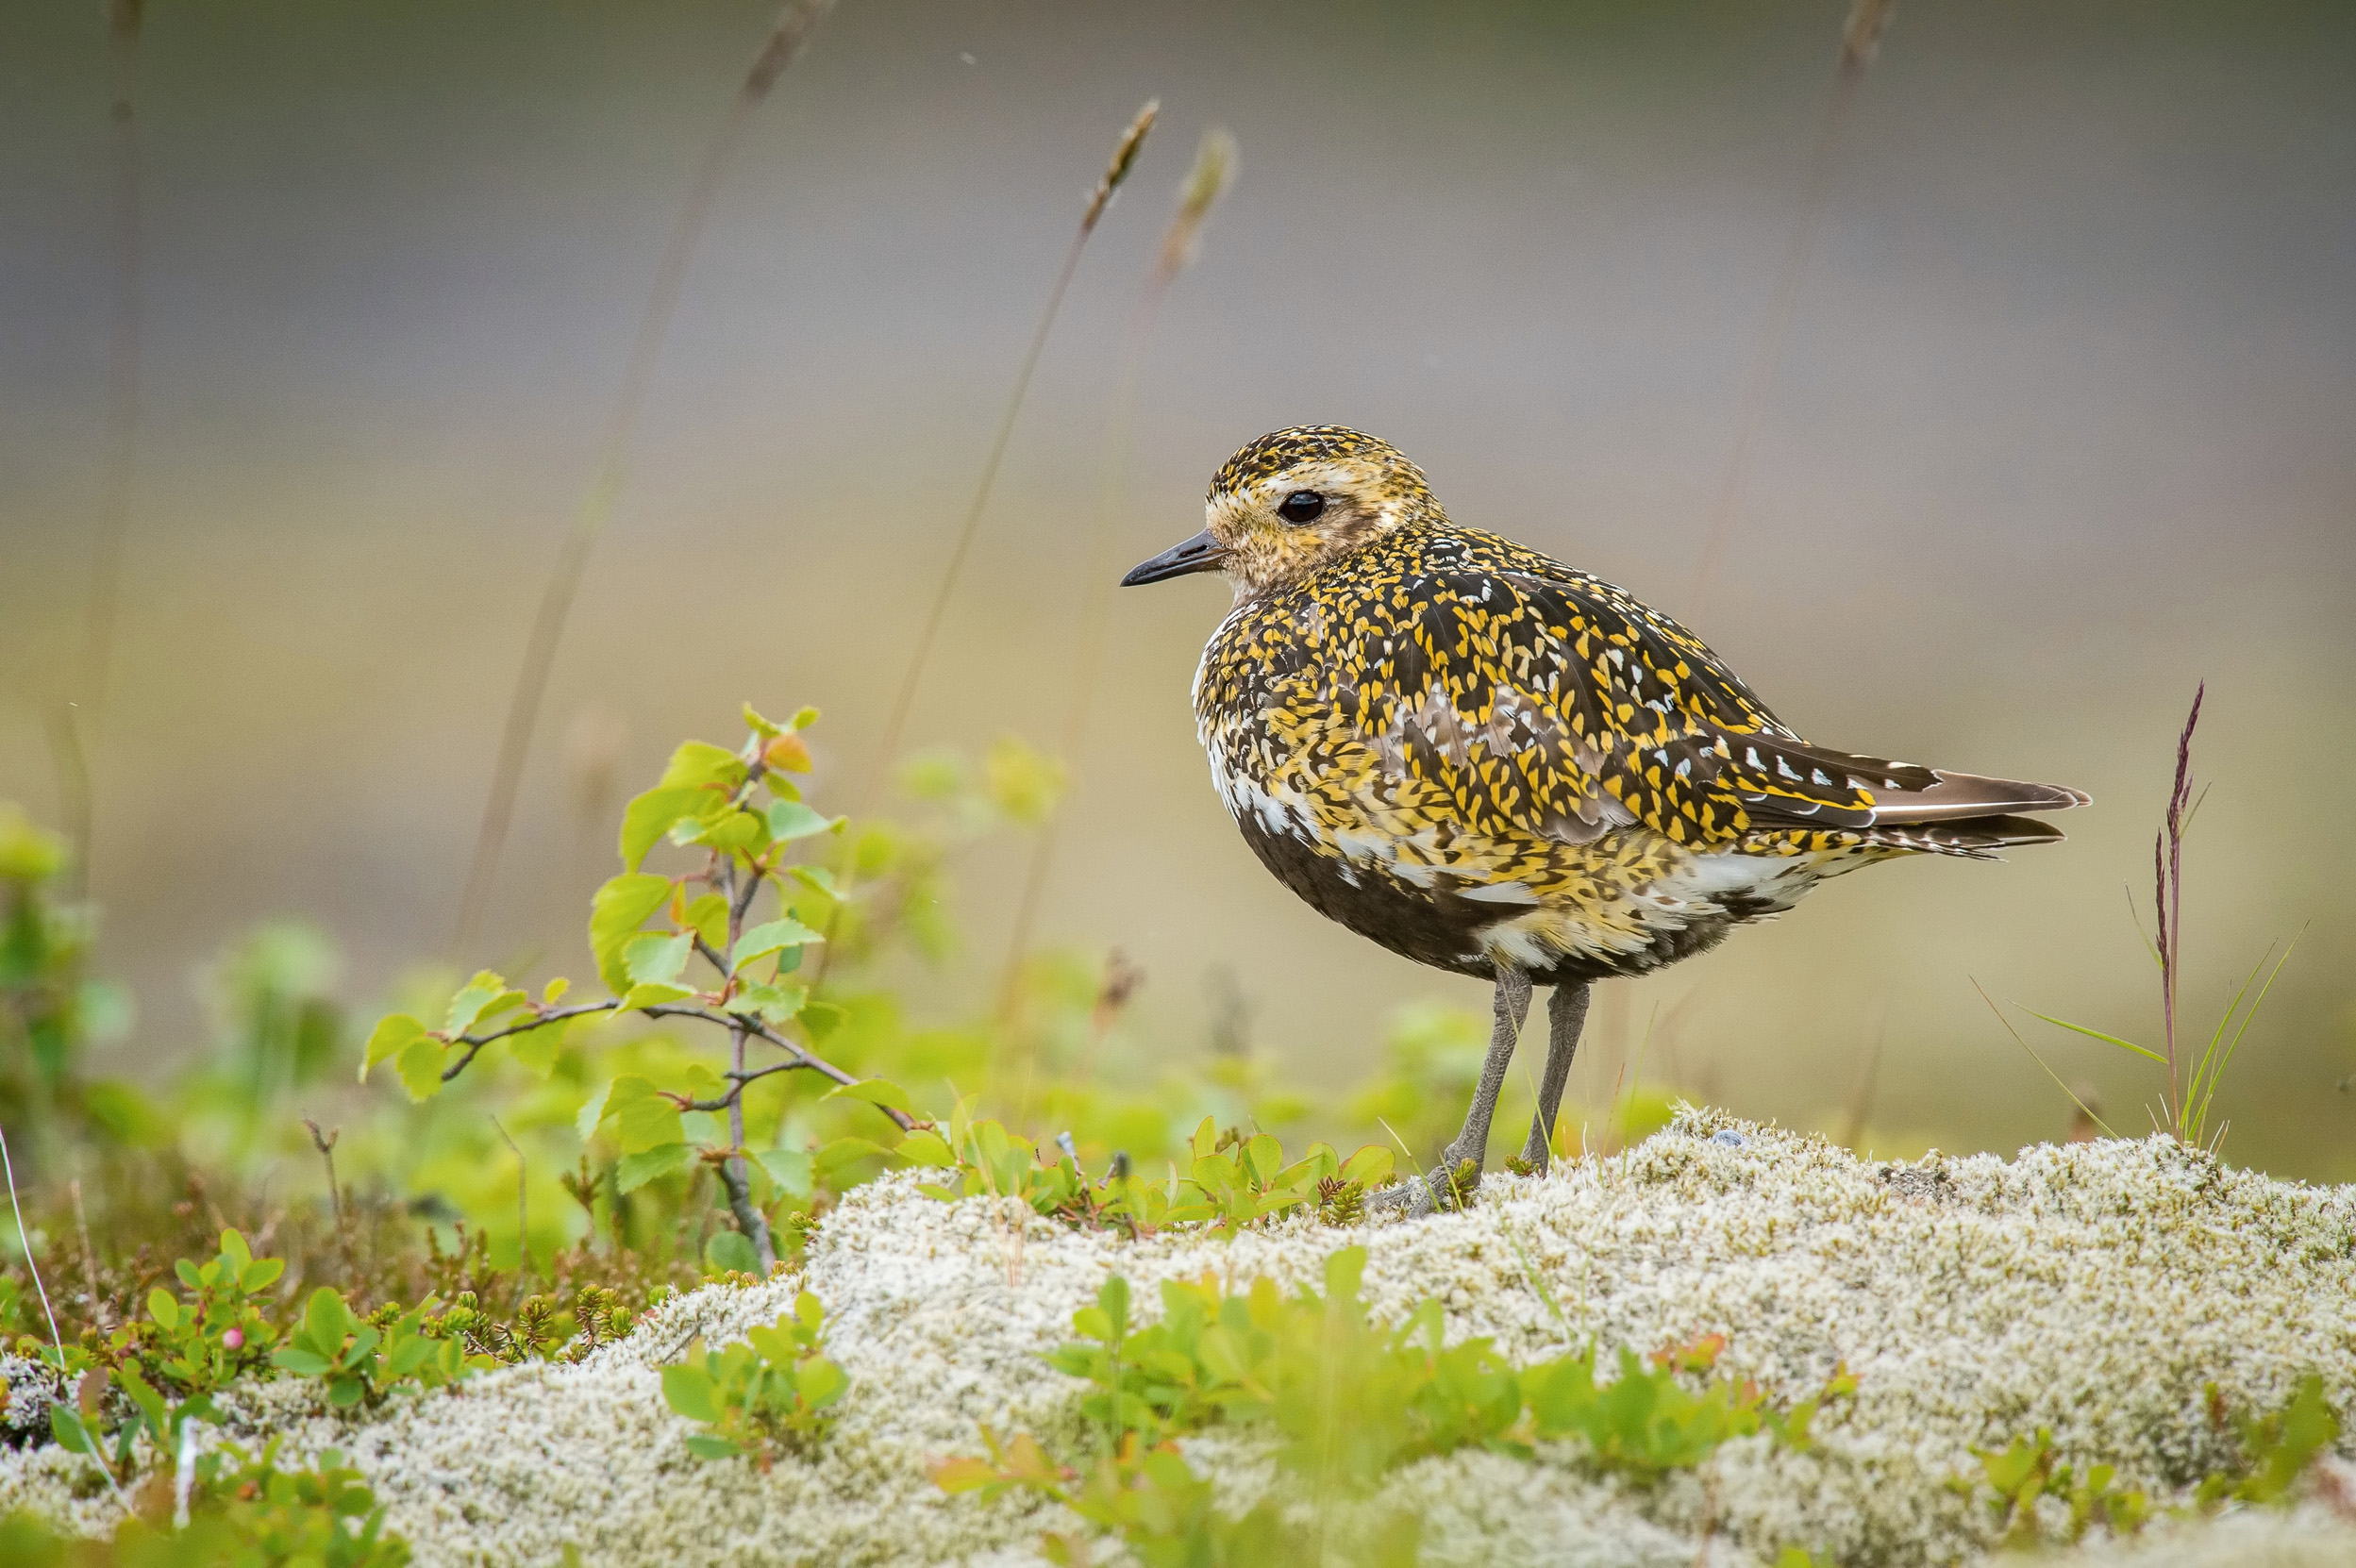 A Golden Plover perched on a sandy rock surrounded by small leafy twigs.